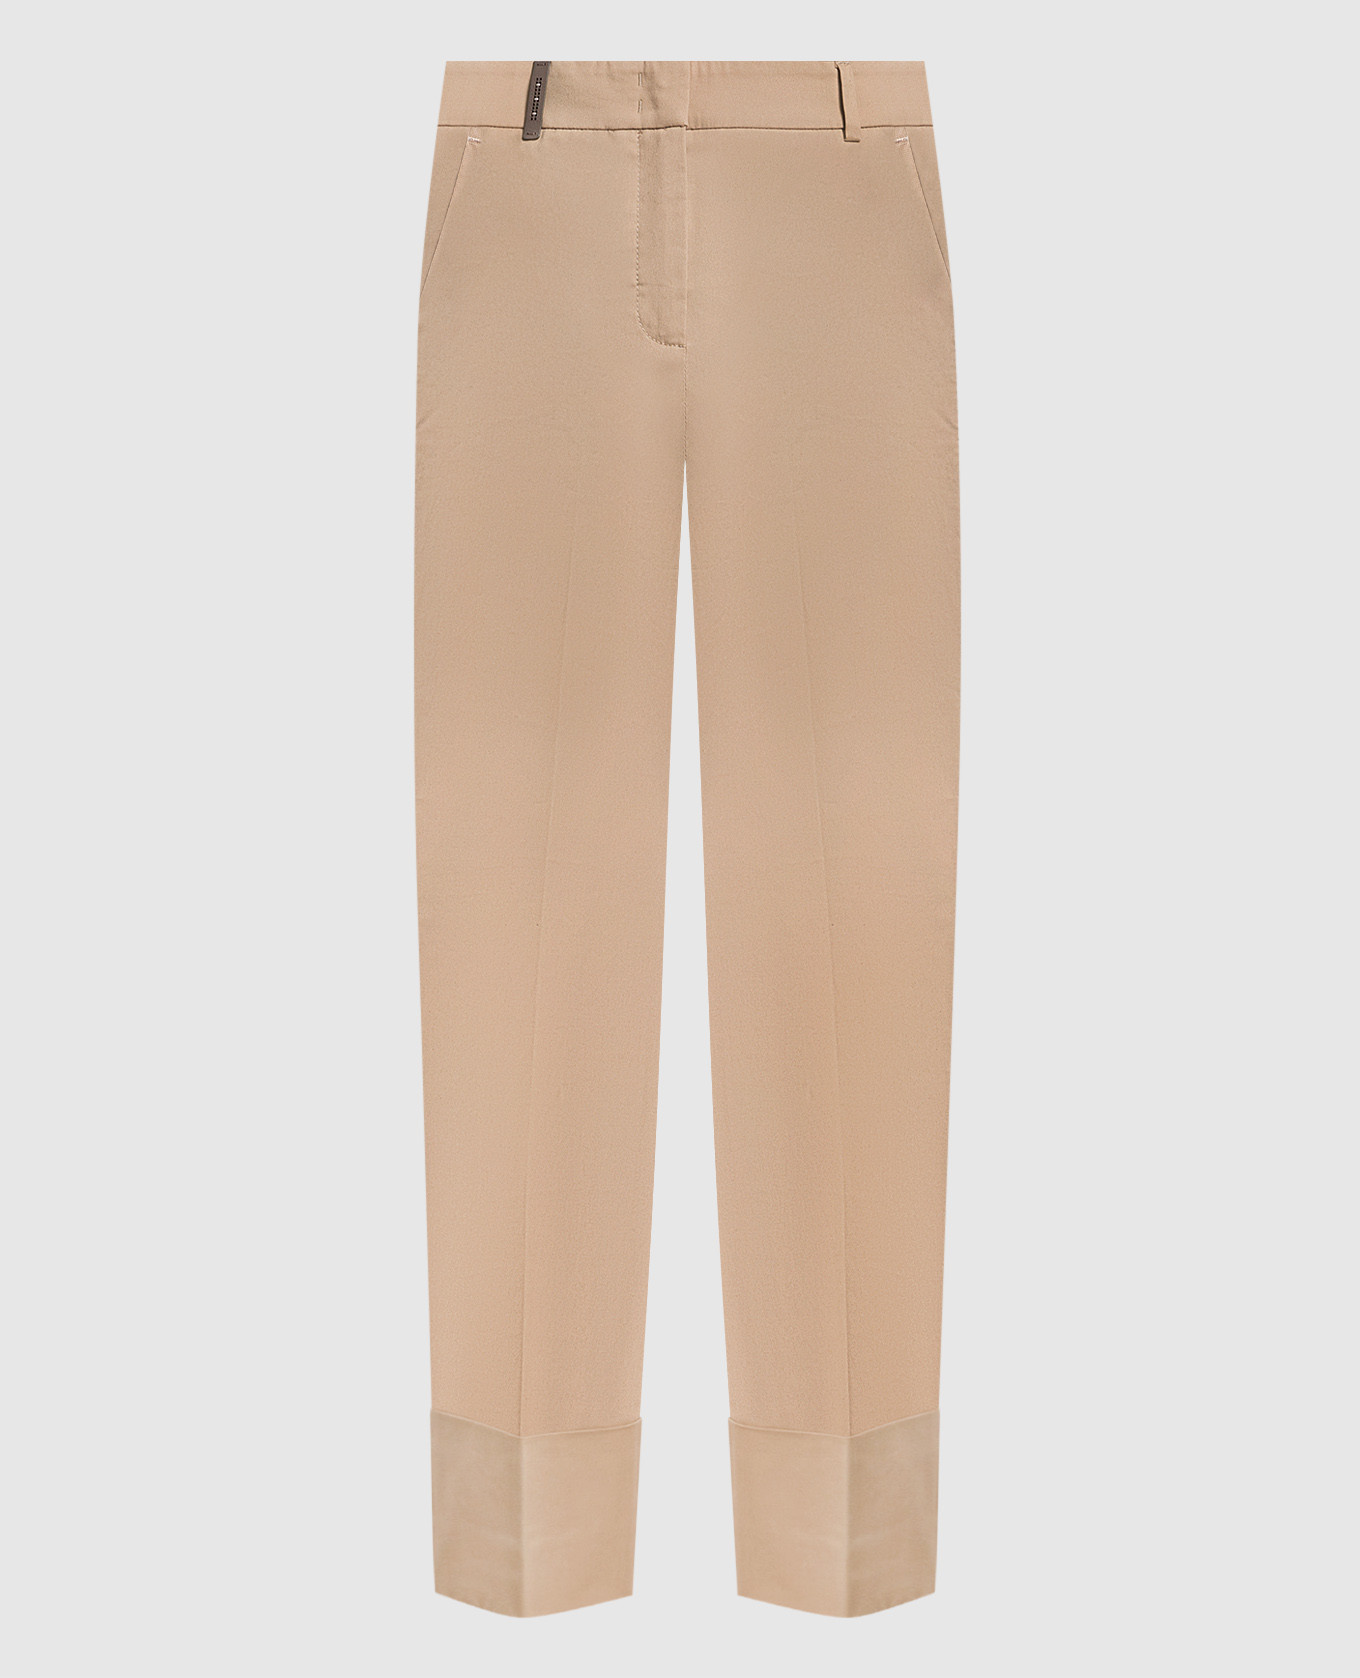 Light brown trousers with cuffs